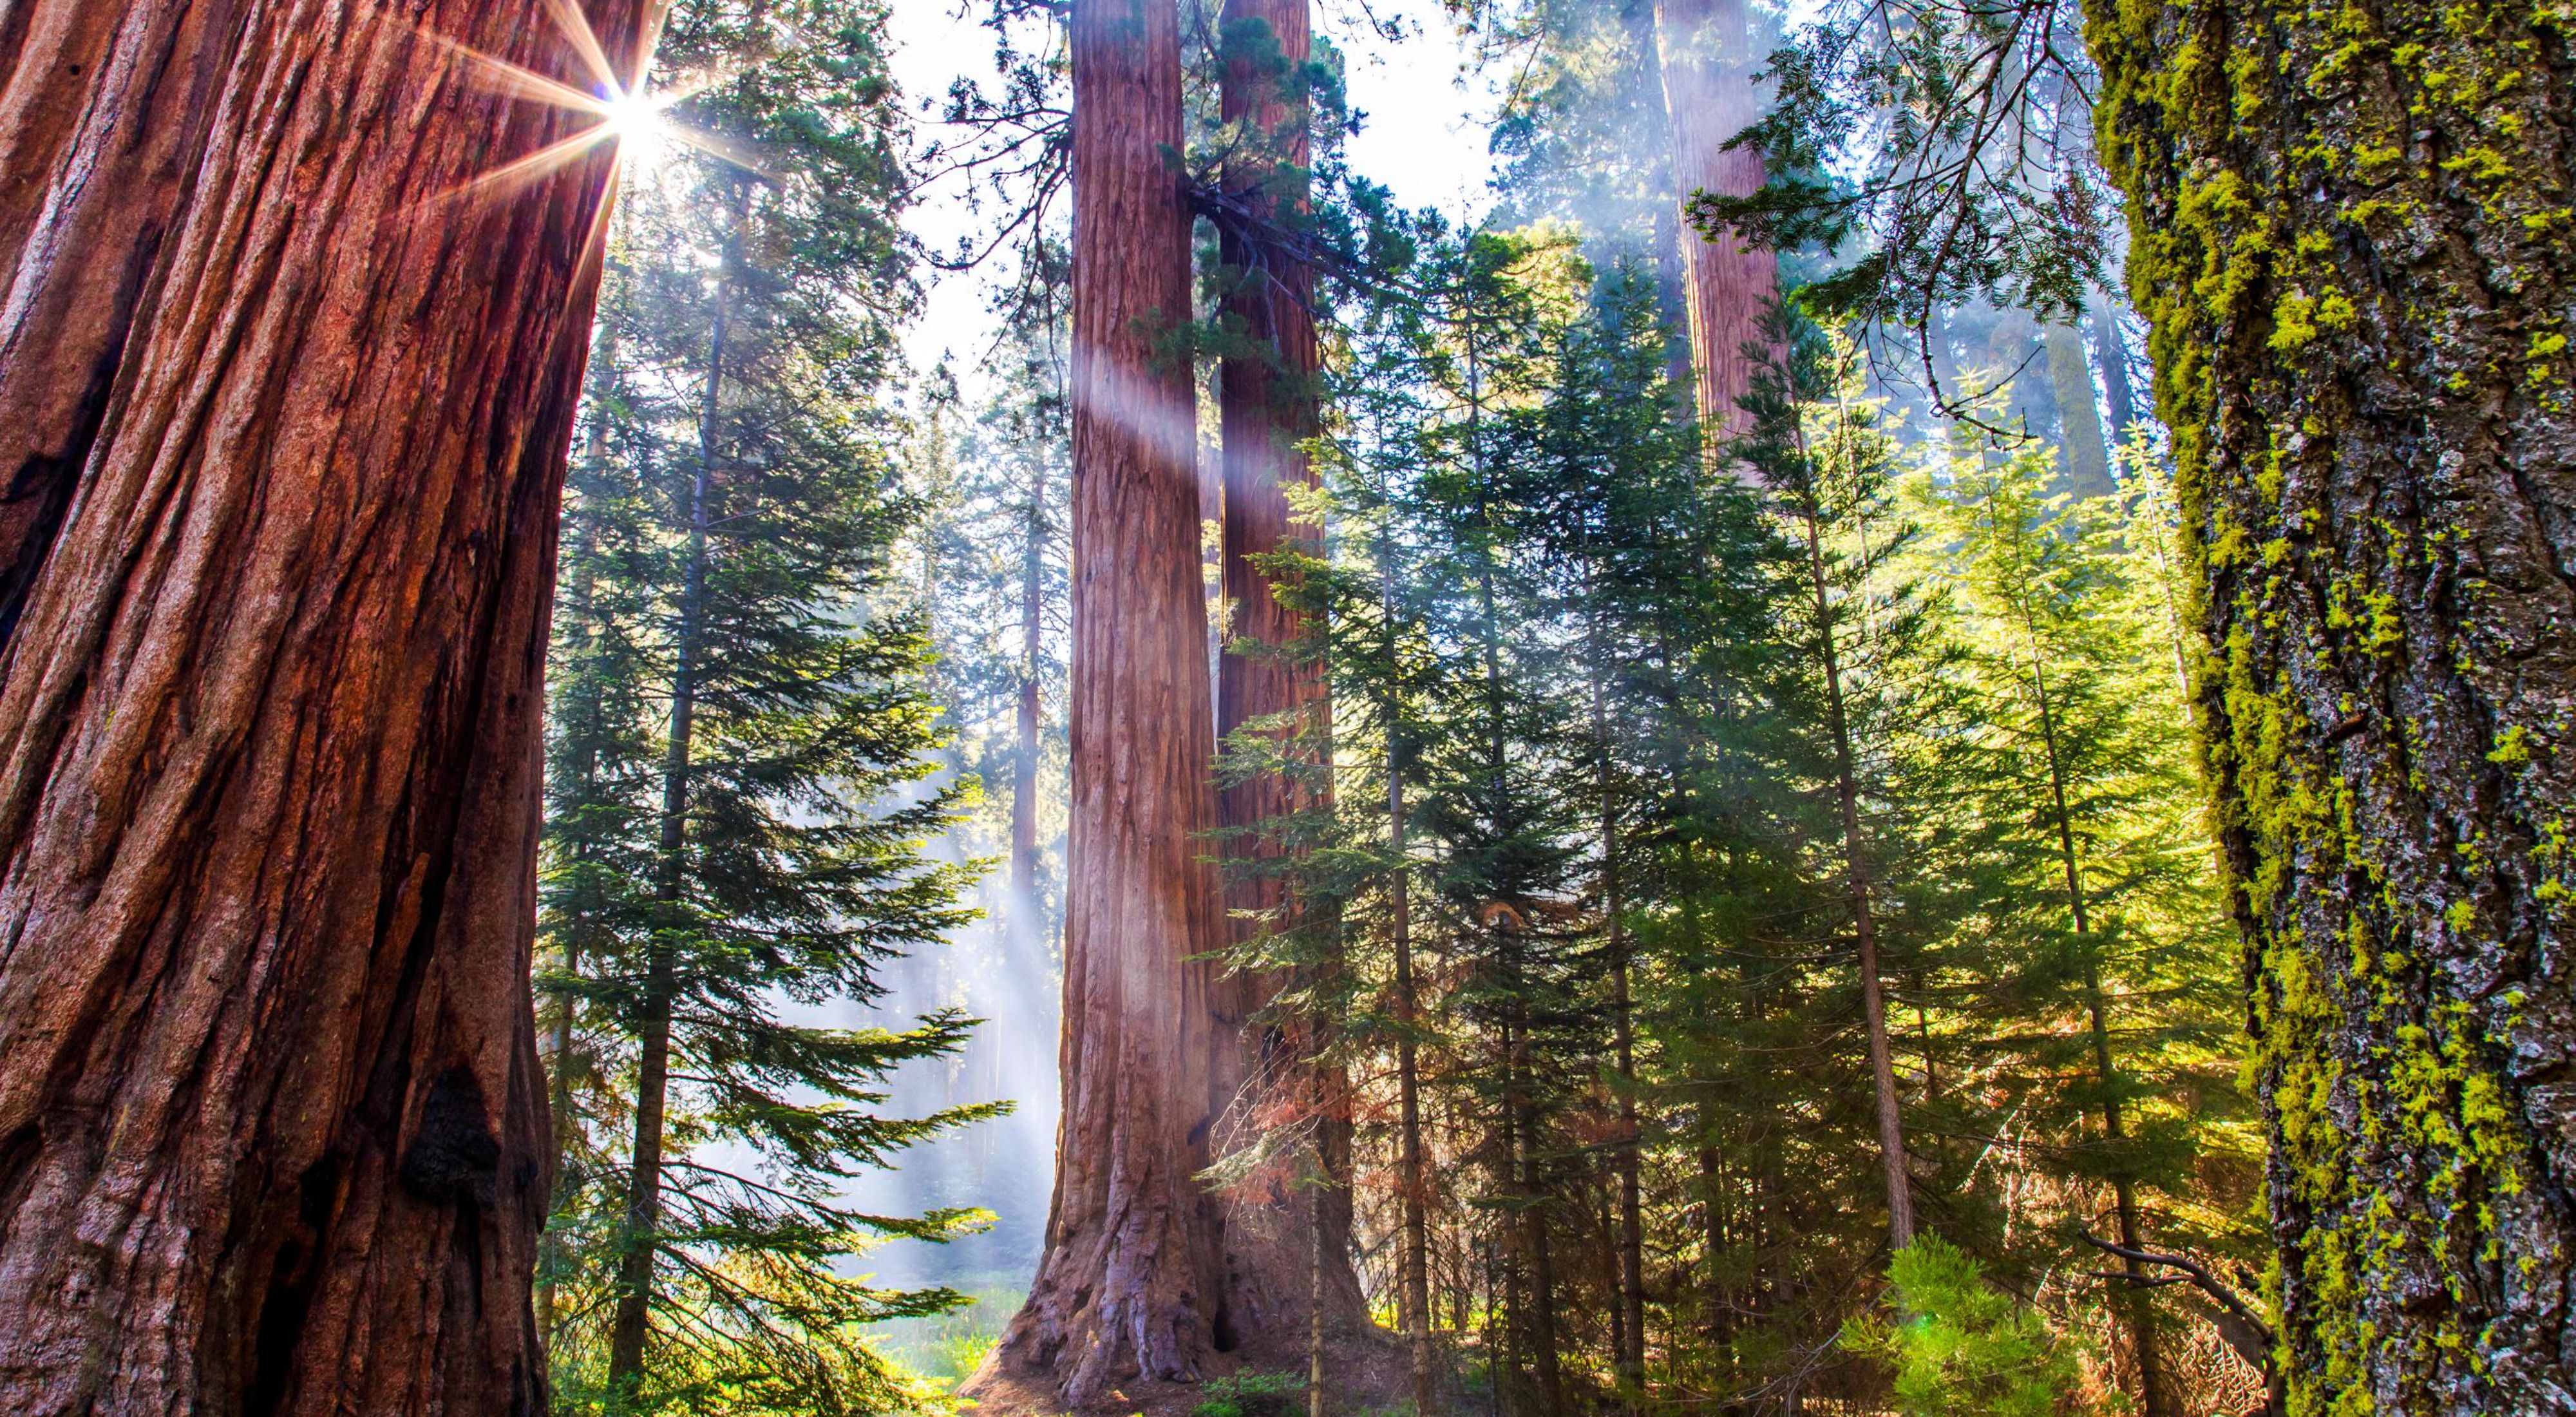 Photo of sunrise coming through trees in Sequoia National Forest.